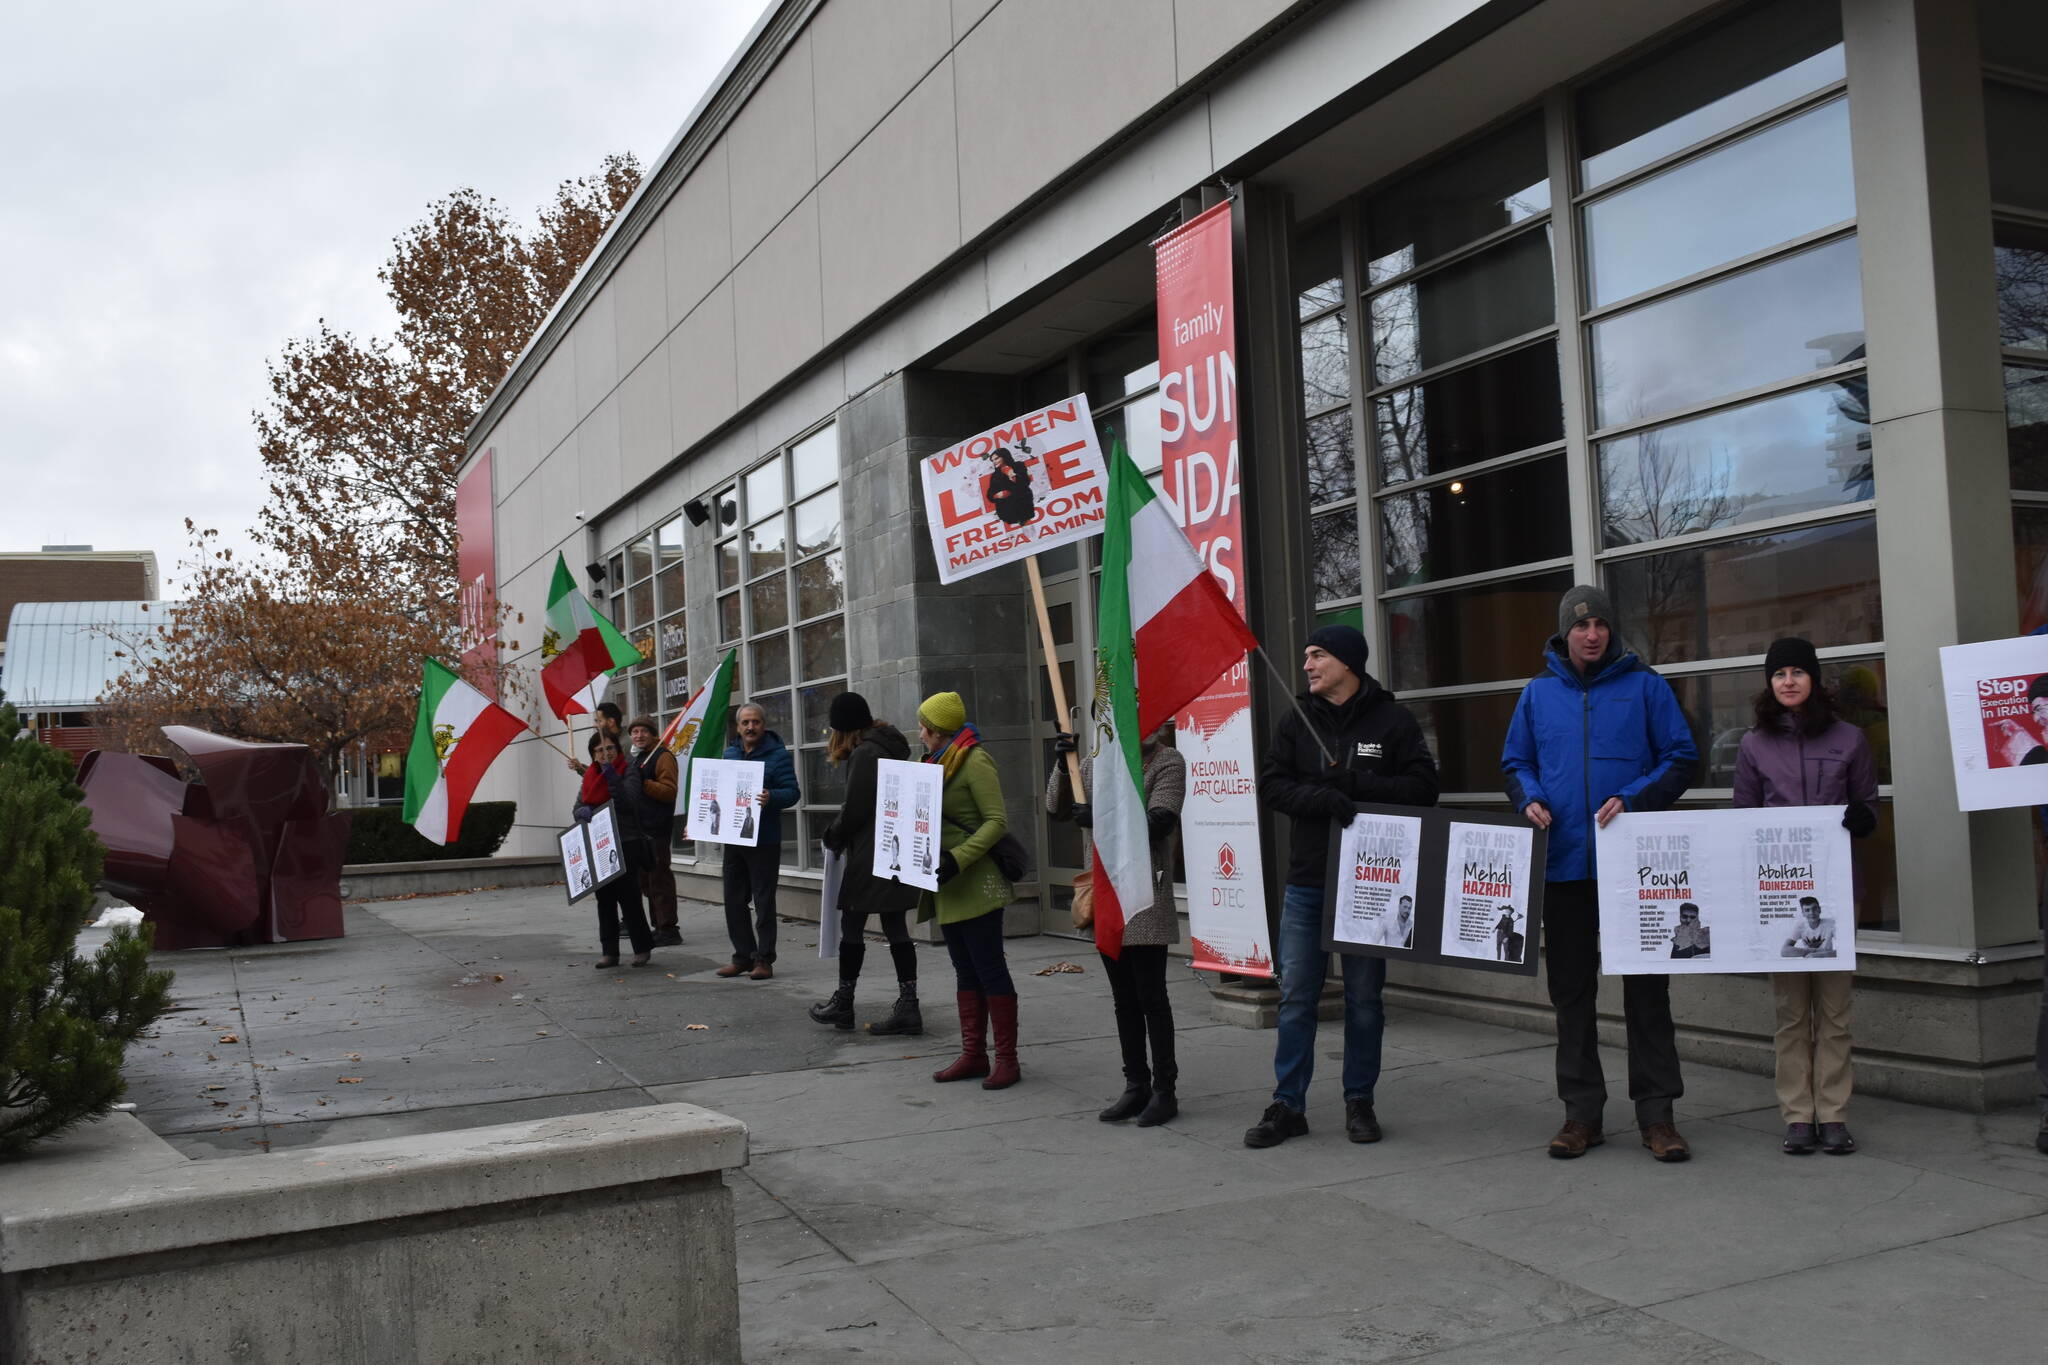 A 'human-chain' protest took place in front of the Kelowna Art Gallery in support of the Iran Revolution on Saturday. (Jordy Cunningham/Capital News)